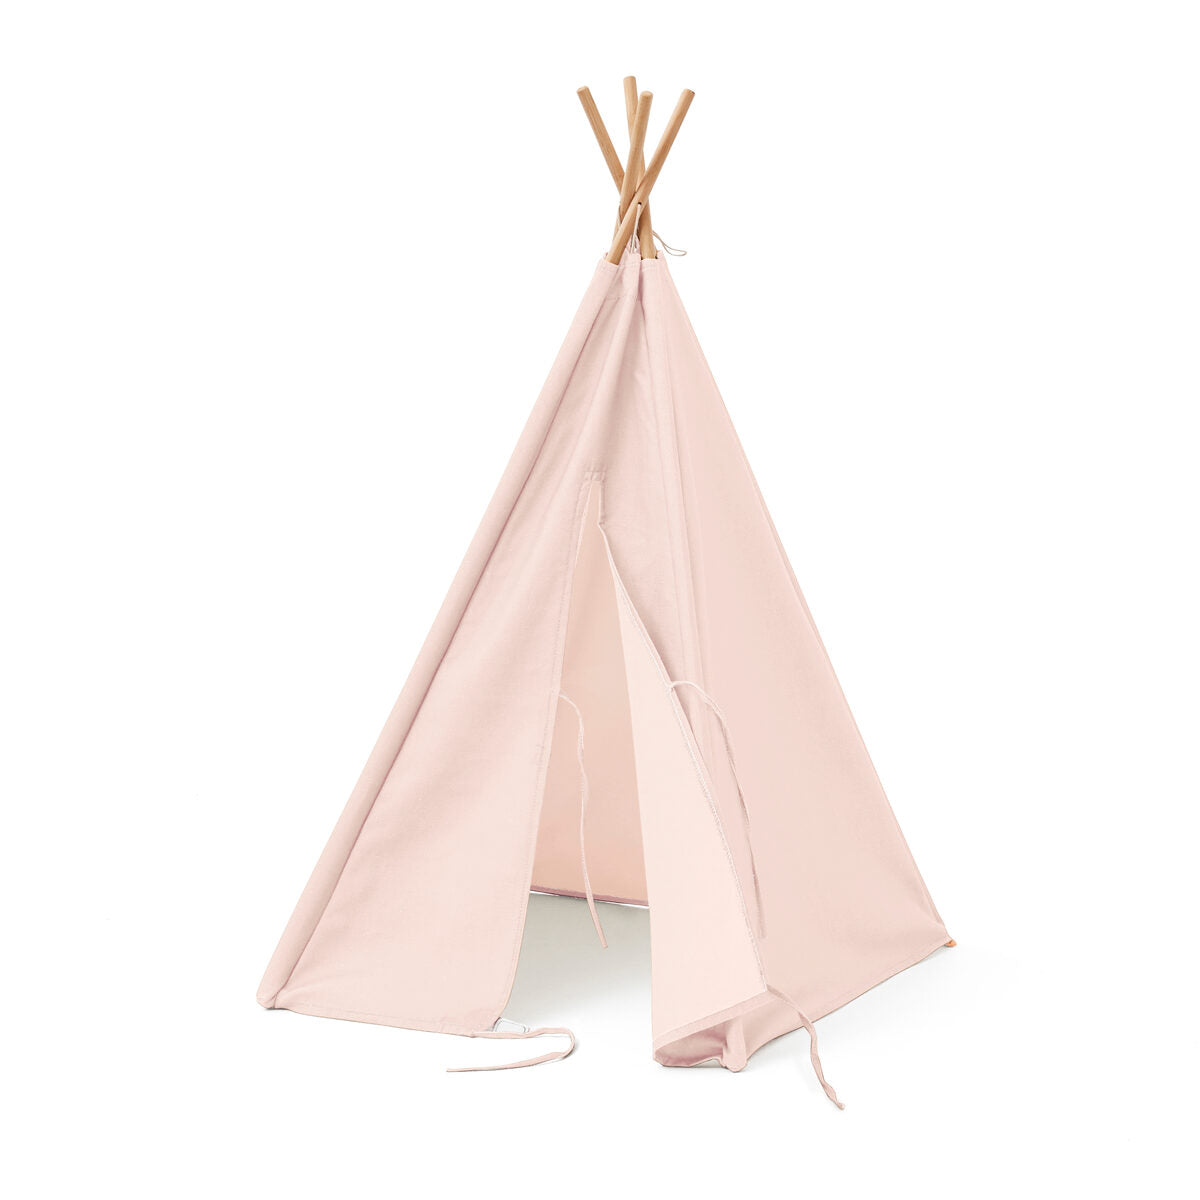 Kids Concept Mini Tipi Tent - Pink (For Dolls/Teddys)